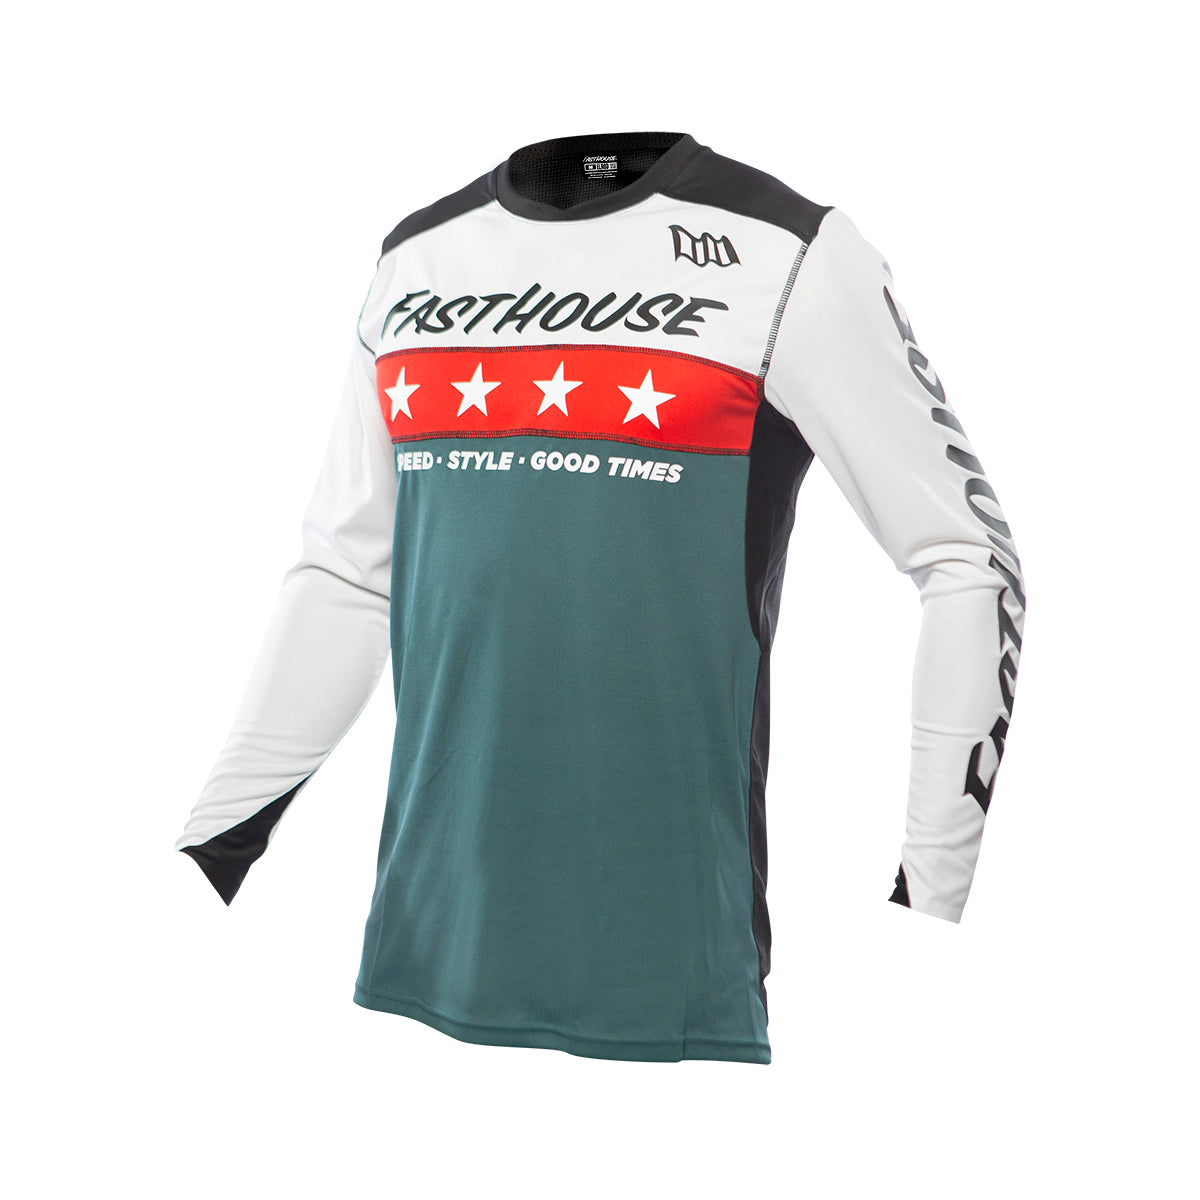 Elrod Astre Youth Jersey - White/Slate